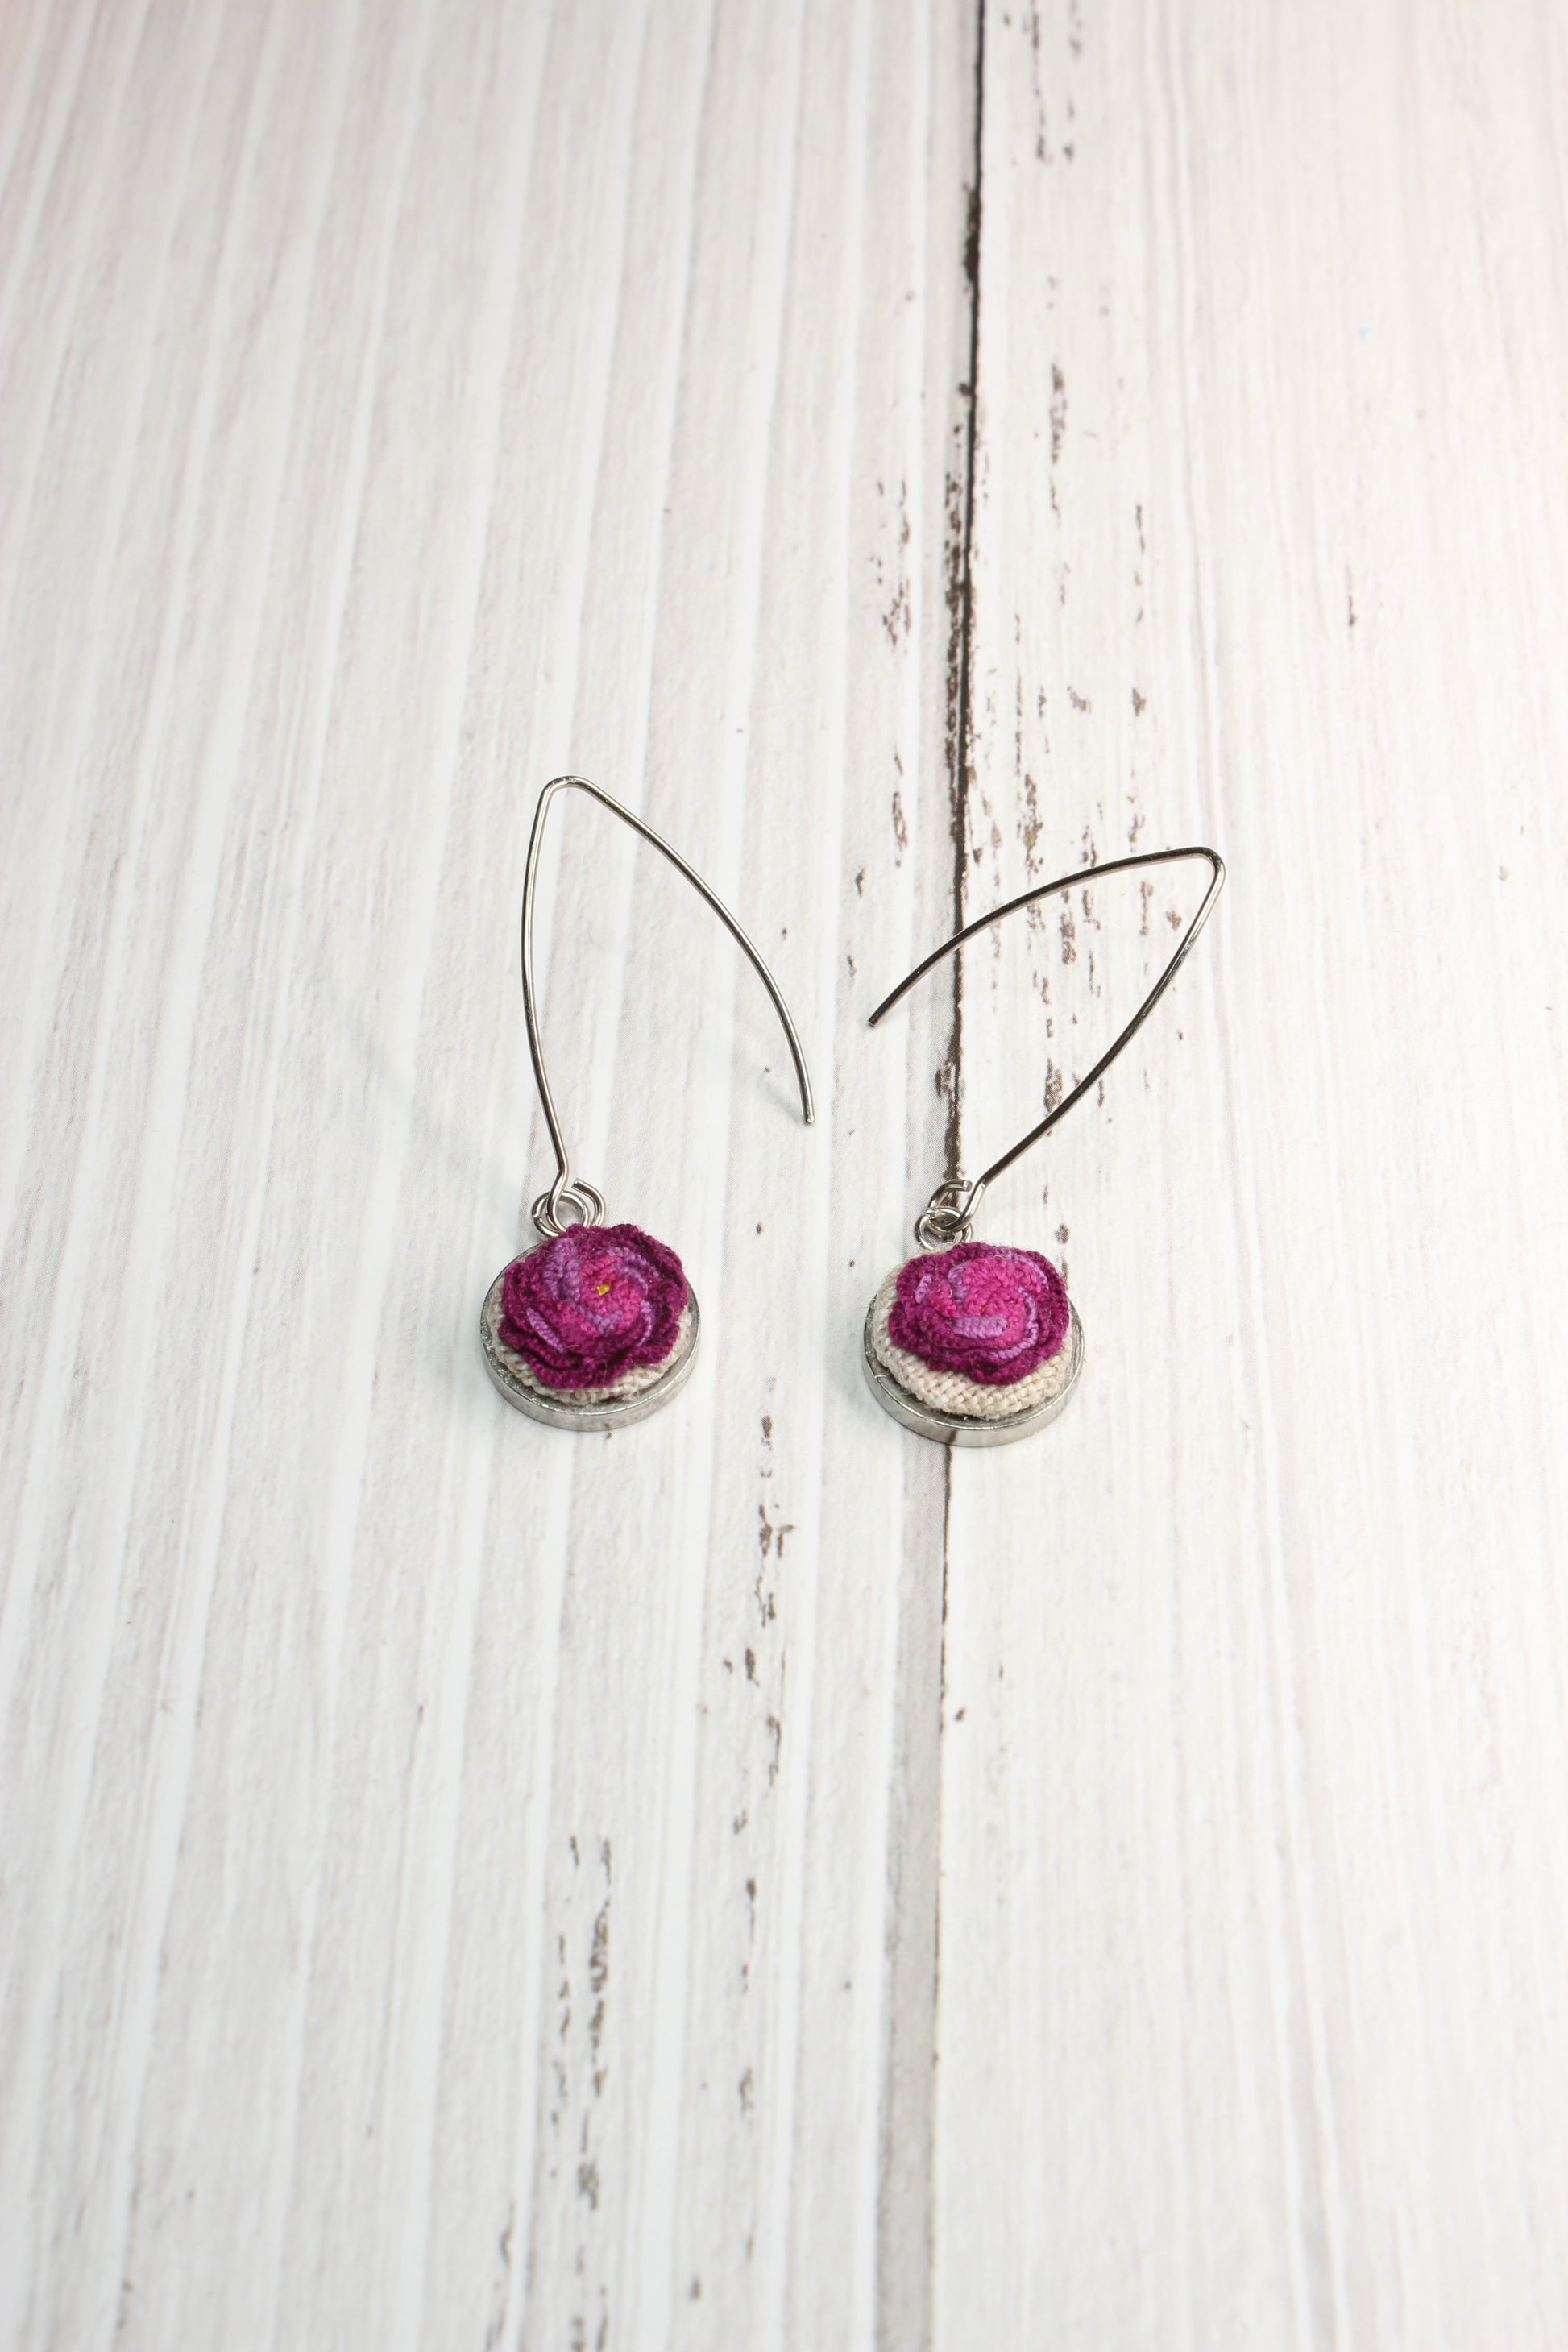 Embroidery Pink Rose Wire Earrings